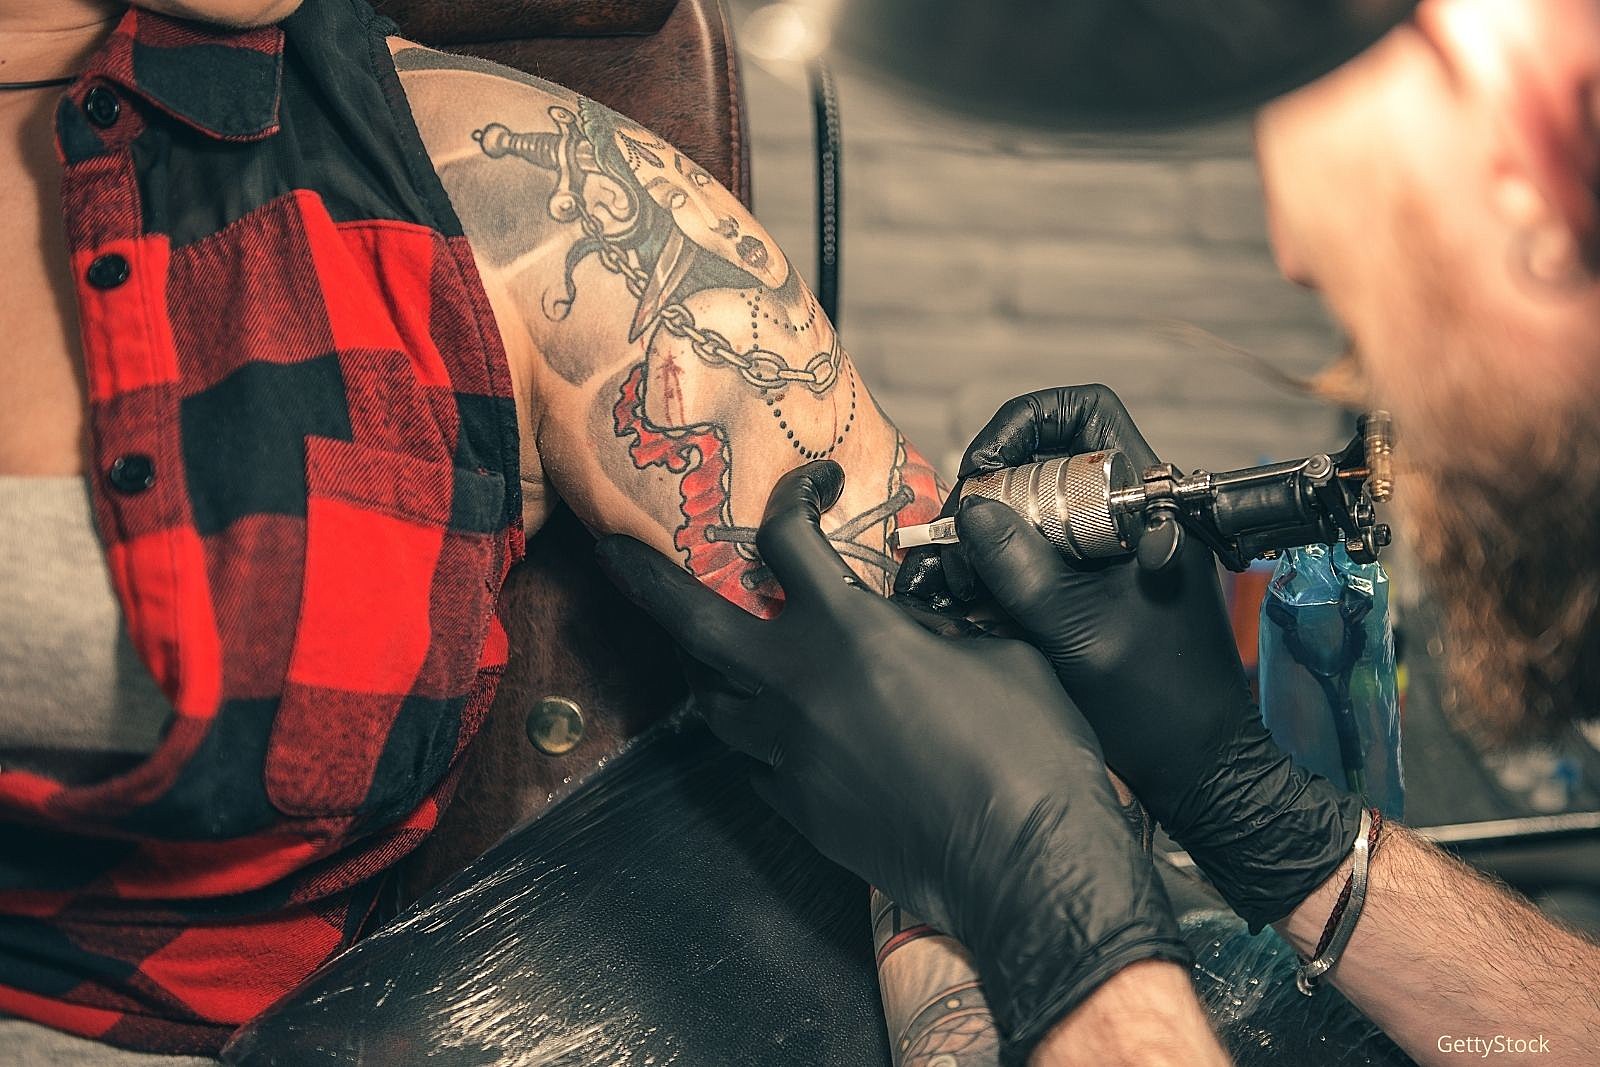 NY ink rule gets under tattoo artists skin